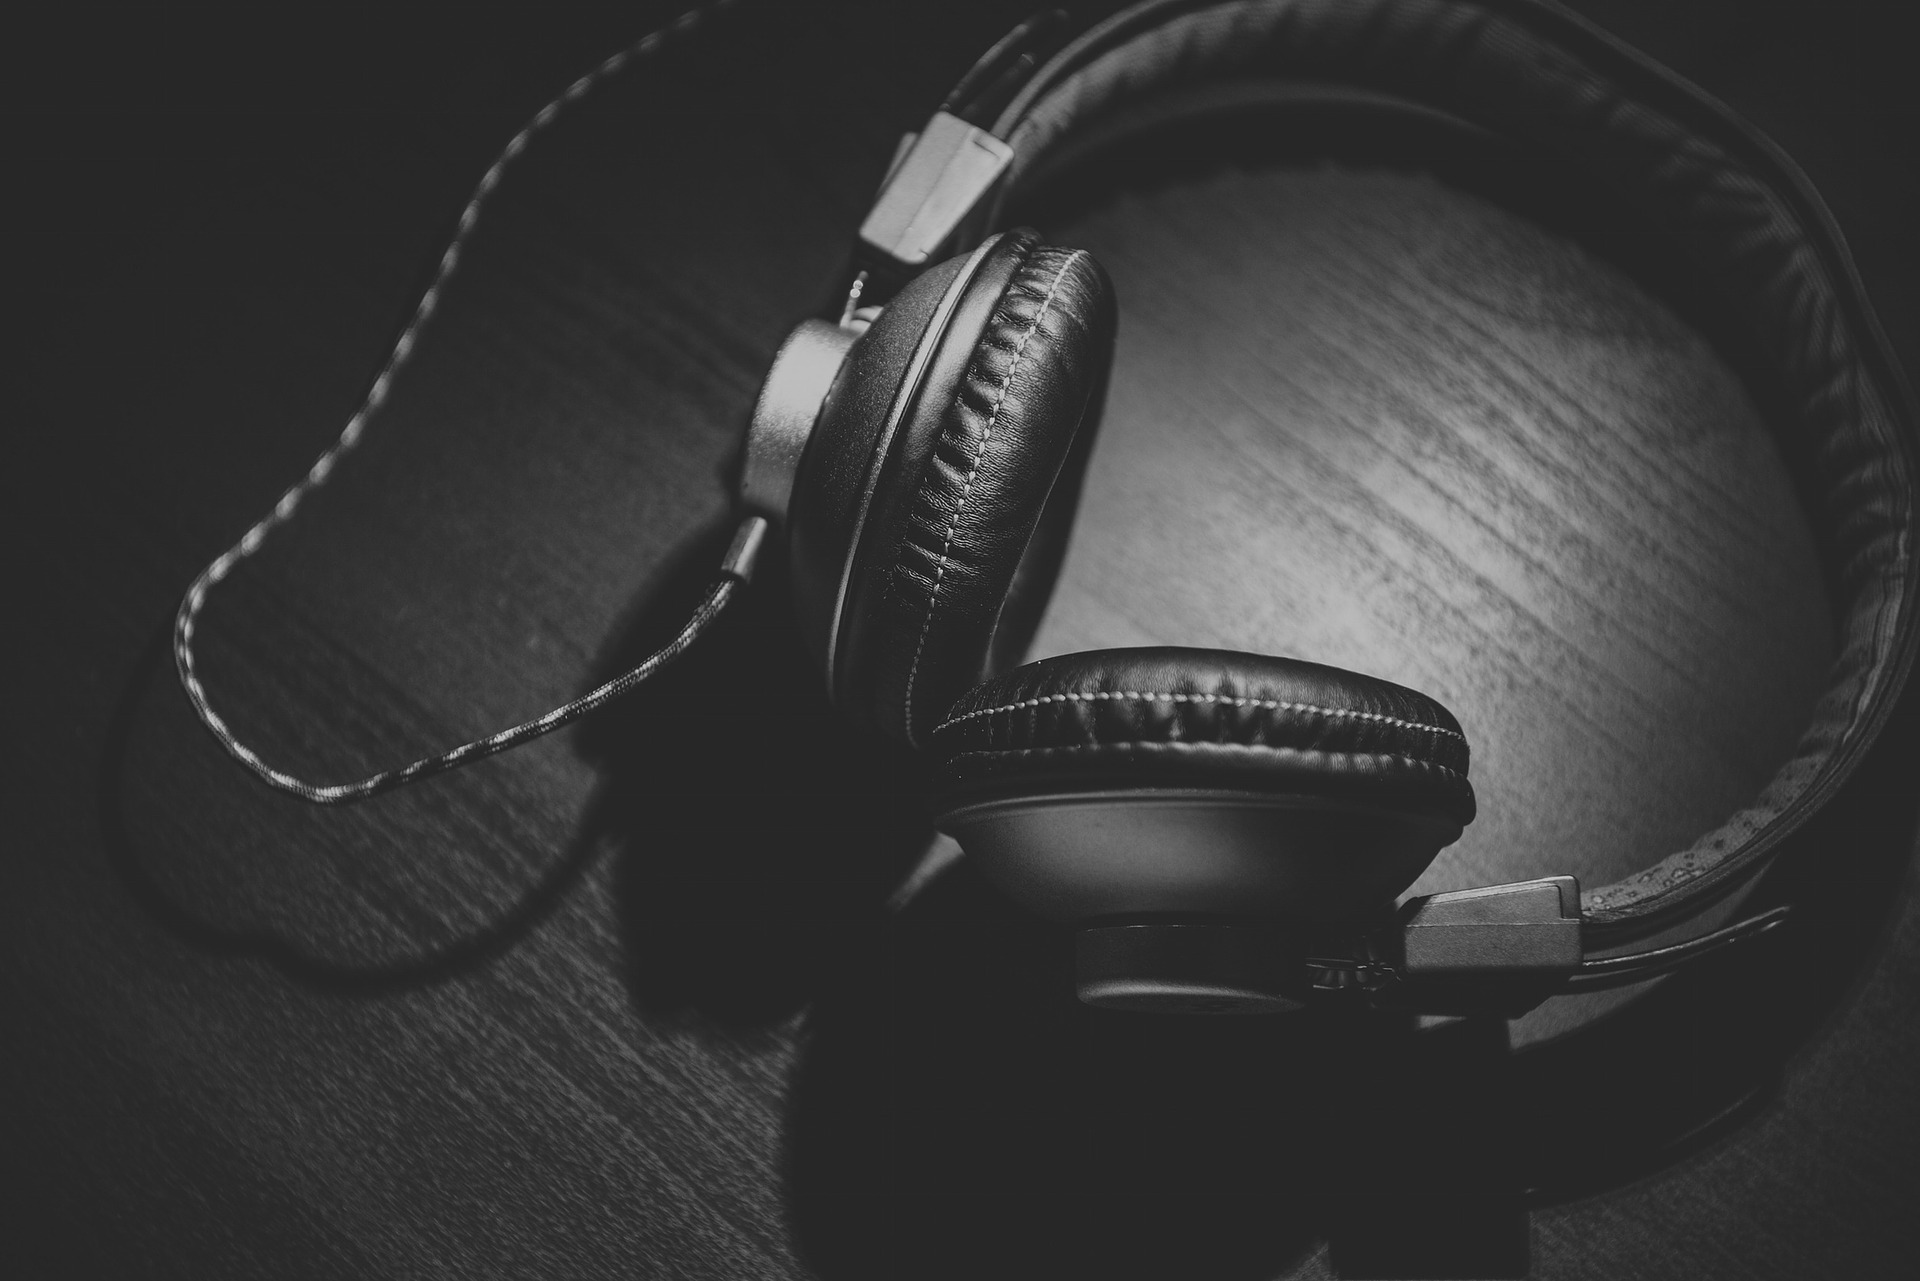 Where Does Audio Fit Into Your Digital Media/Content Strategy?